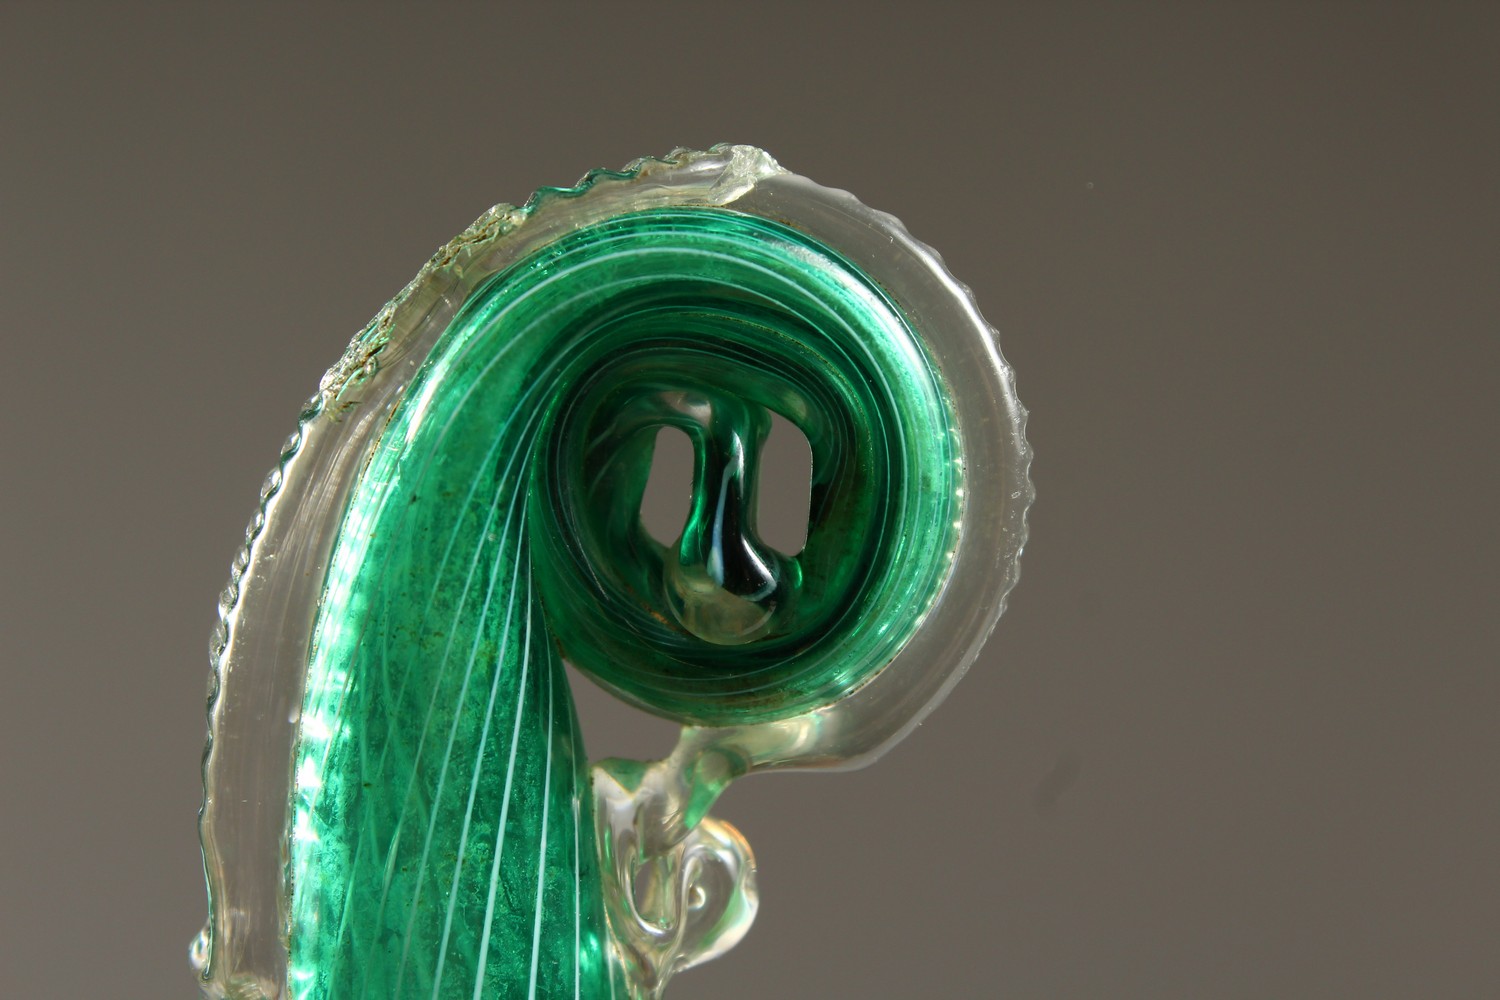 AN ITALIAN GREEN GLASS SPIRAL SHAPED SCENT BOTTLE with cork stopper. 7.5cms long. - Image 6 of 7